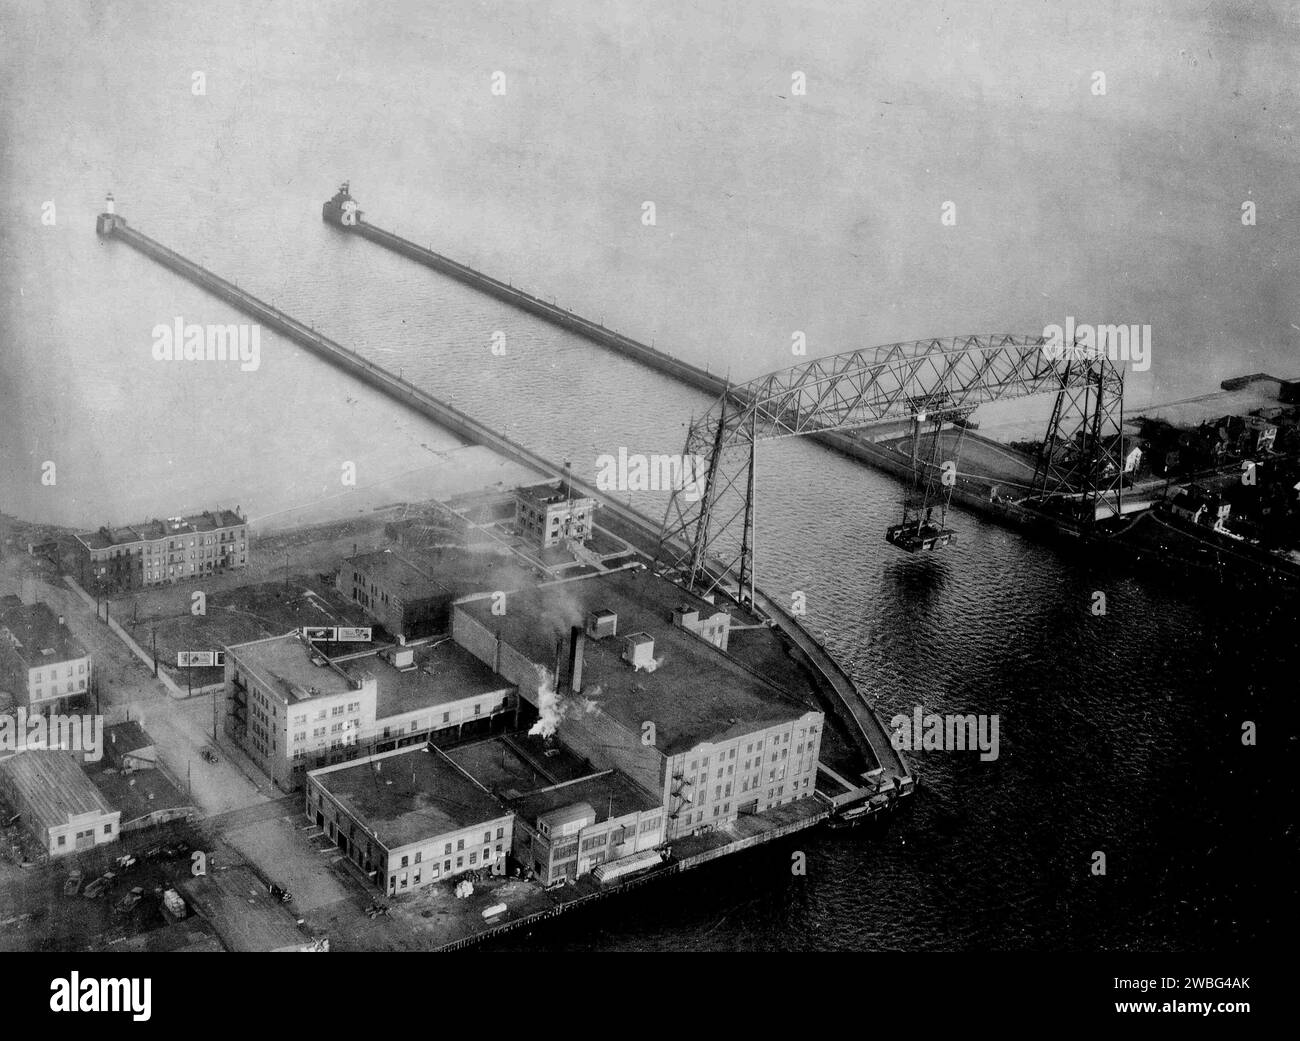 AIRSCAPES Minnesota Taken by McCook Field, during Mapping of Canadian Border, Oct. & Nov. 1925 Duluth Harbor Basin, the main business section and portions of Lake Superior, showing the 'Eighth Wonder of the World', the aerial bridge connecting Duluth proper with a long neck of land known as Minnesota Point, which really makes the Duluth Superior Harbor. Stock Photo